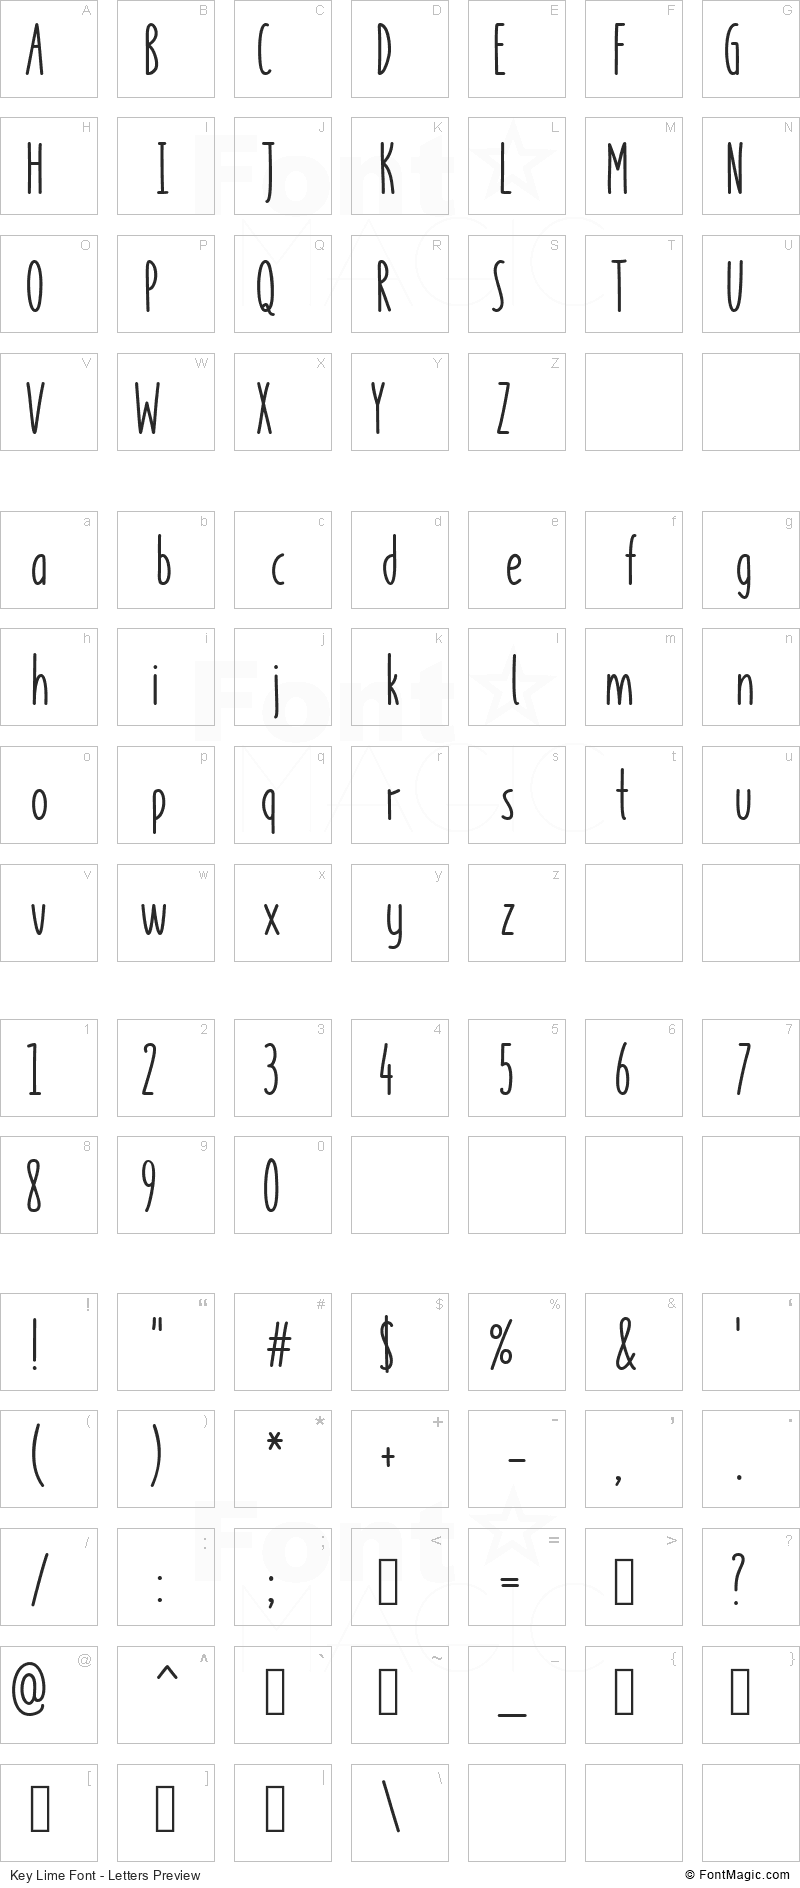 Key Lime Font - All Latters Preview Chart